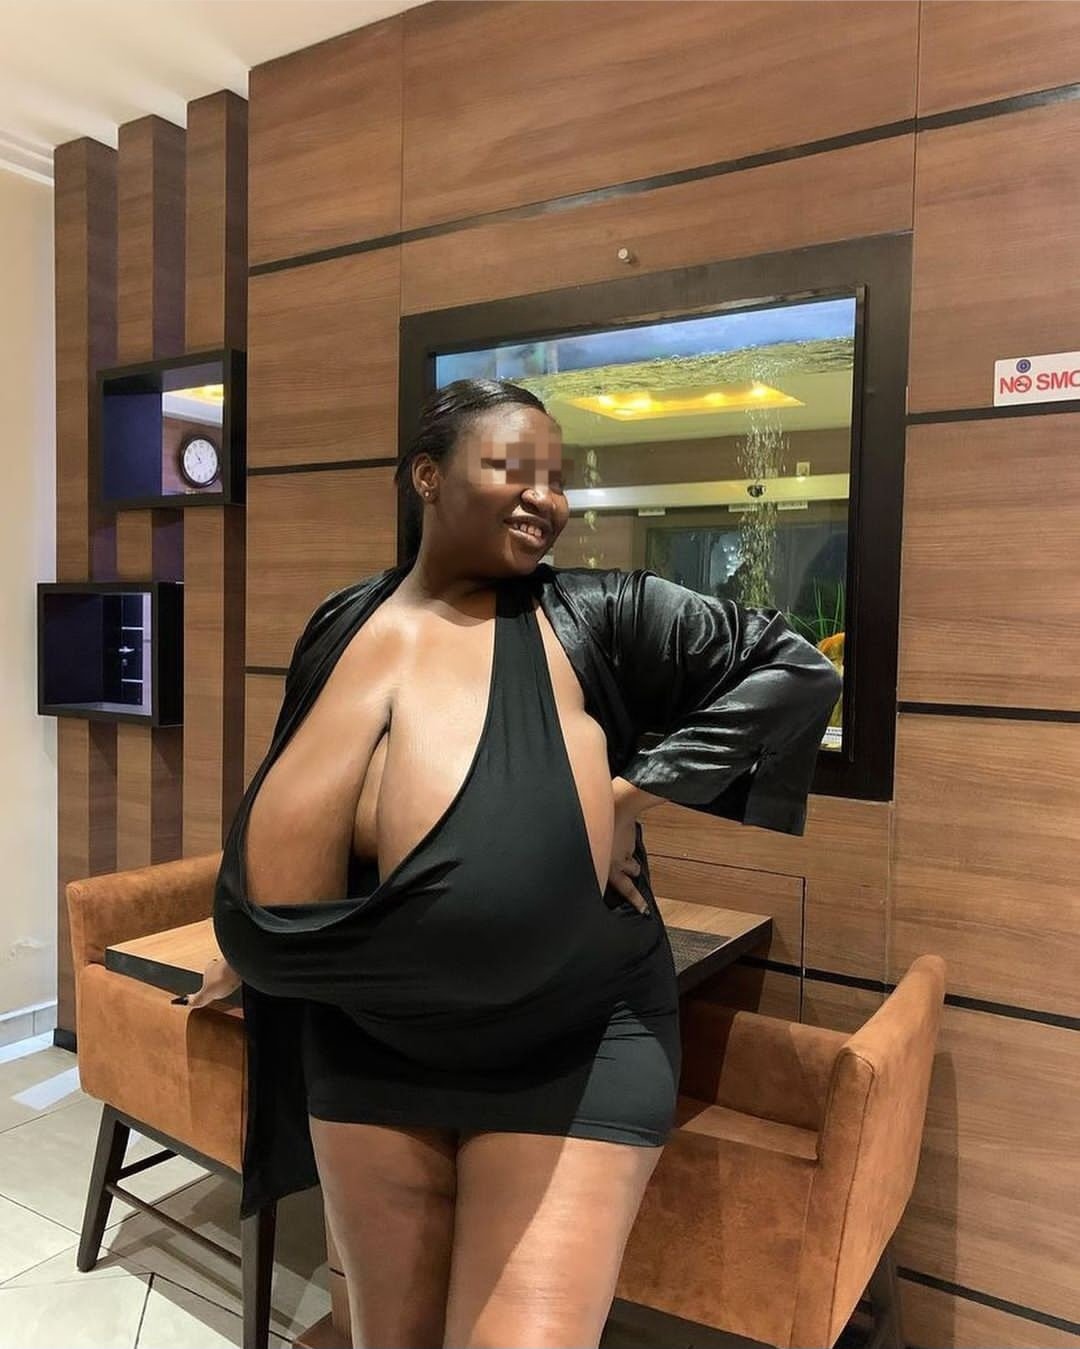 Woman Shows Off Her Huge Breasts Popping Out Of Her Skimpy Dress (Photos) -  Romance - Nigeria